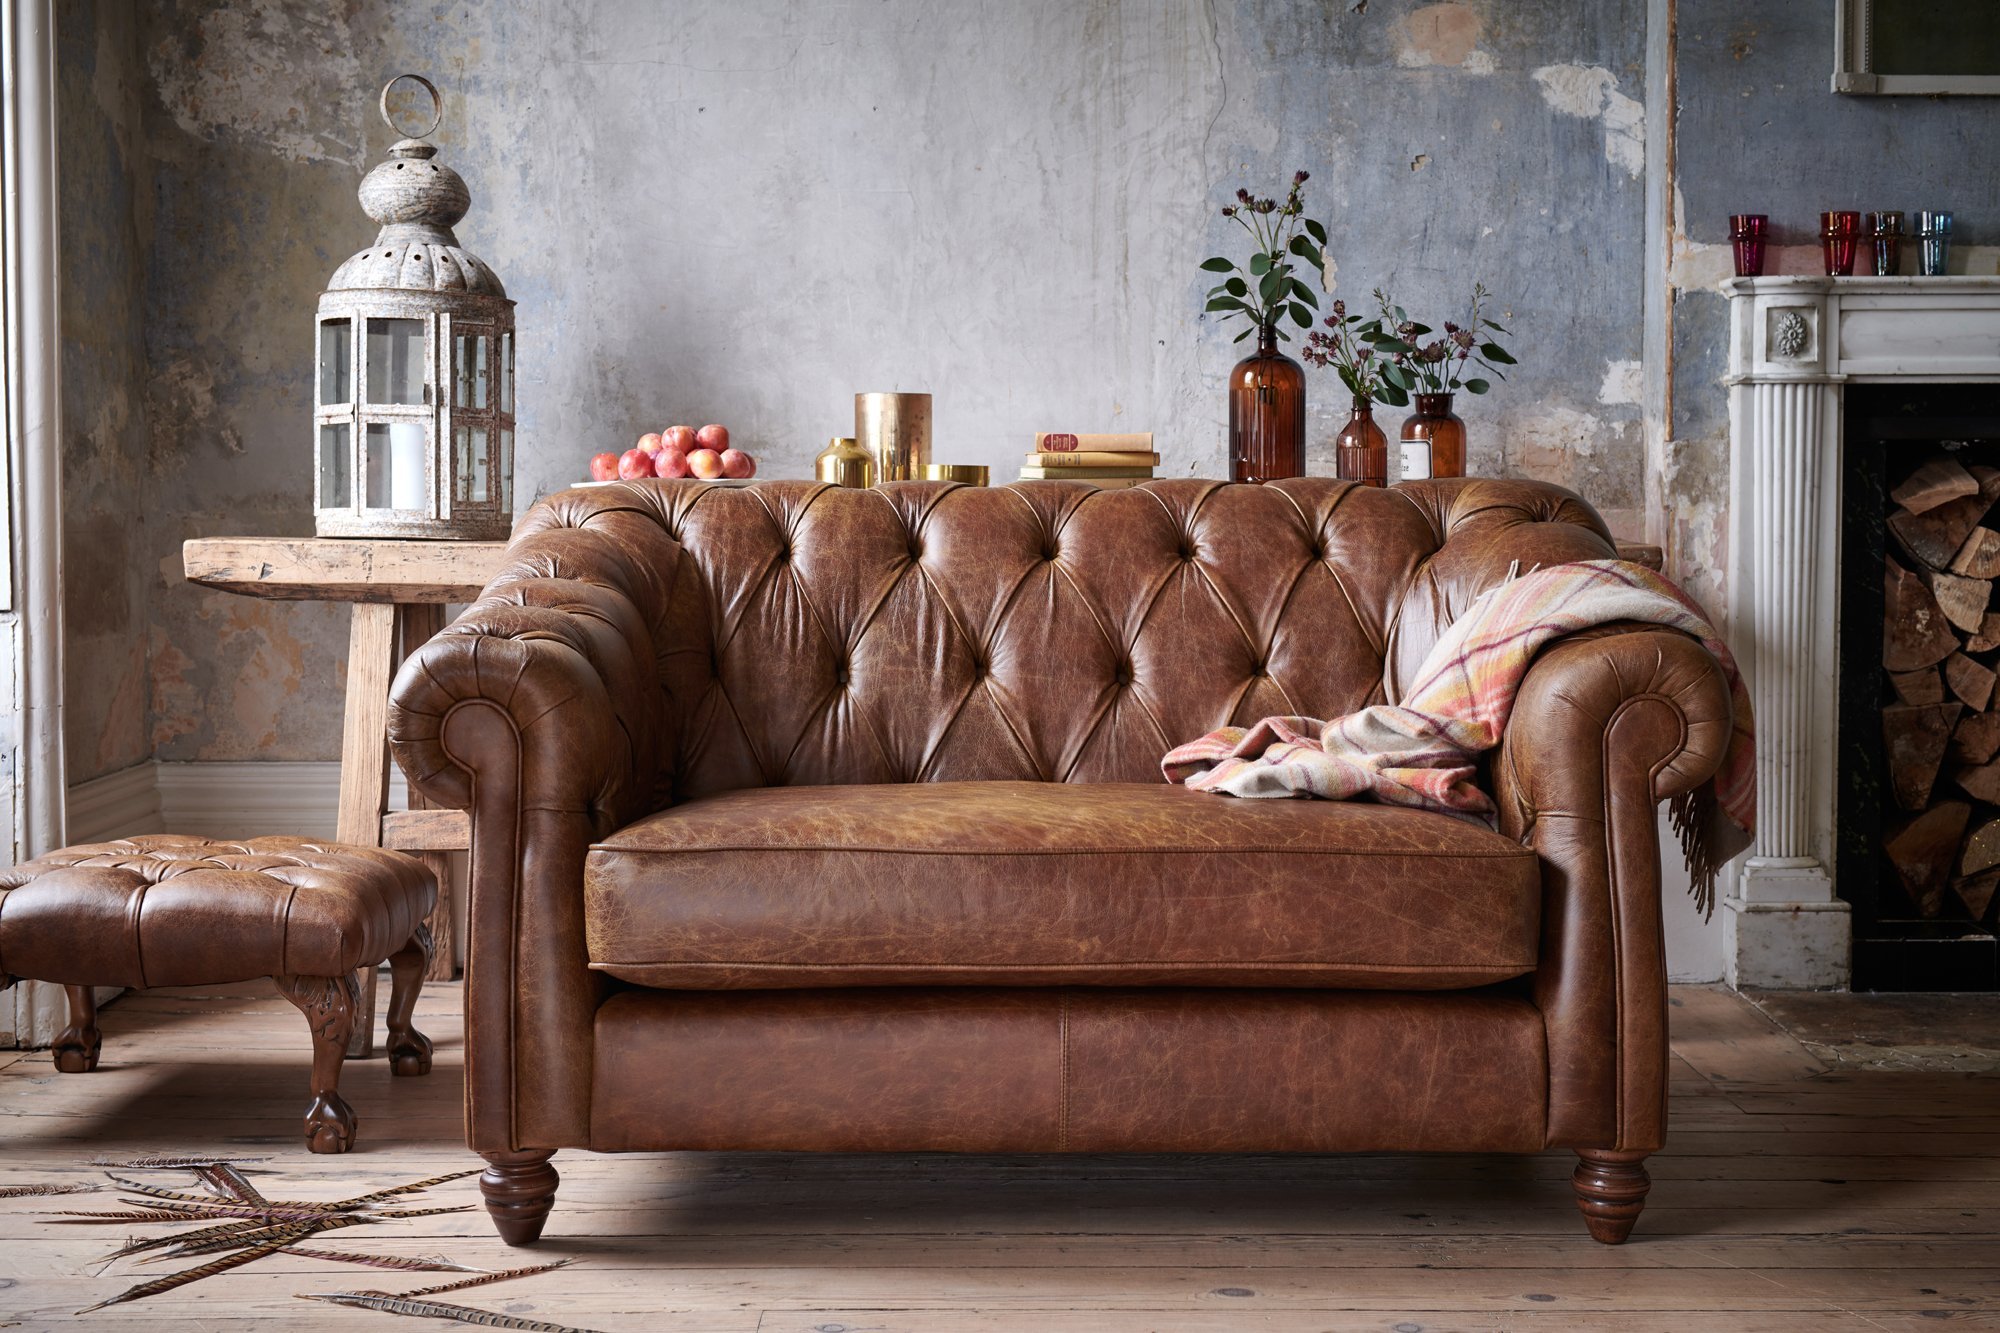 Tips To Keep Your Leather Sofa Looking, Best Leather Sofa Cleaner Wipes